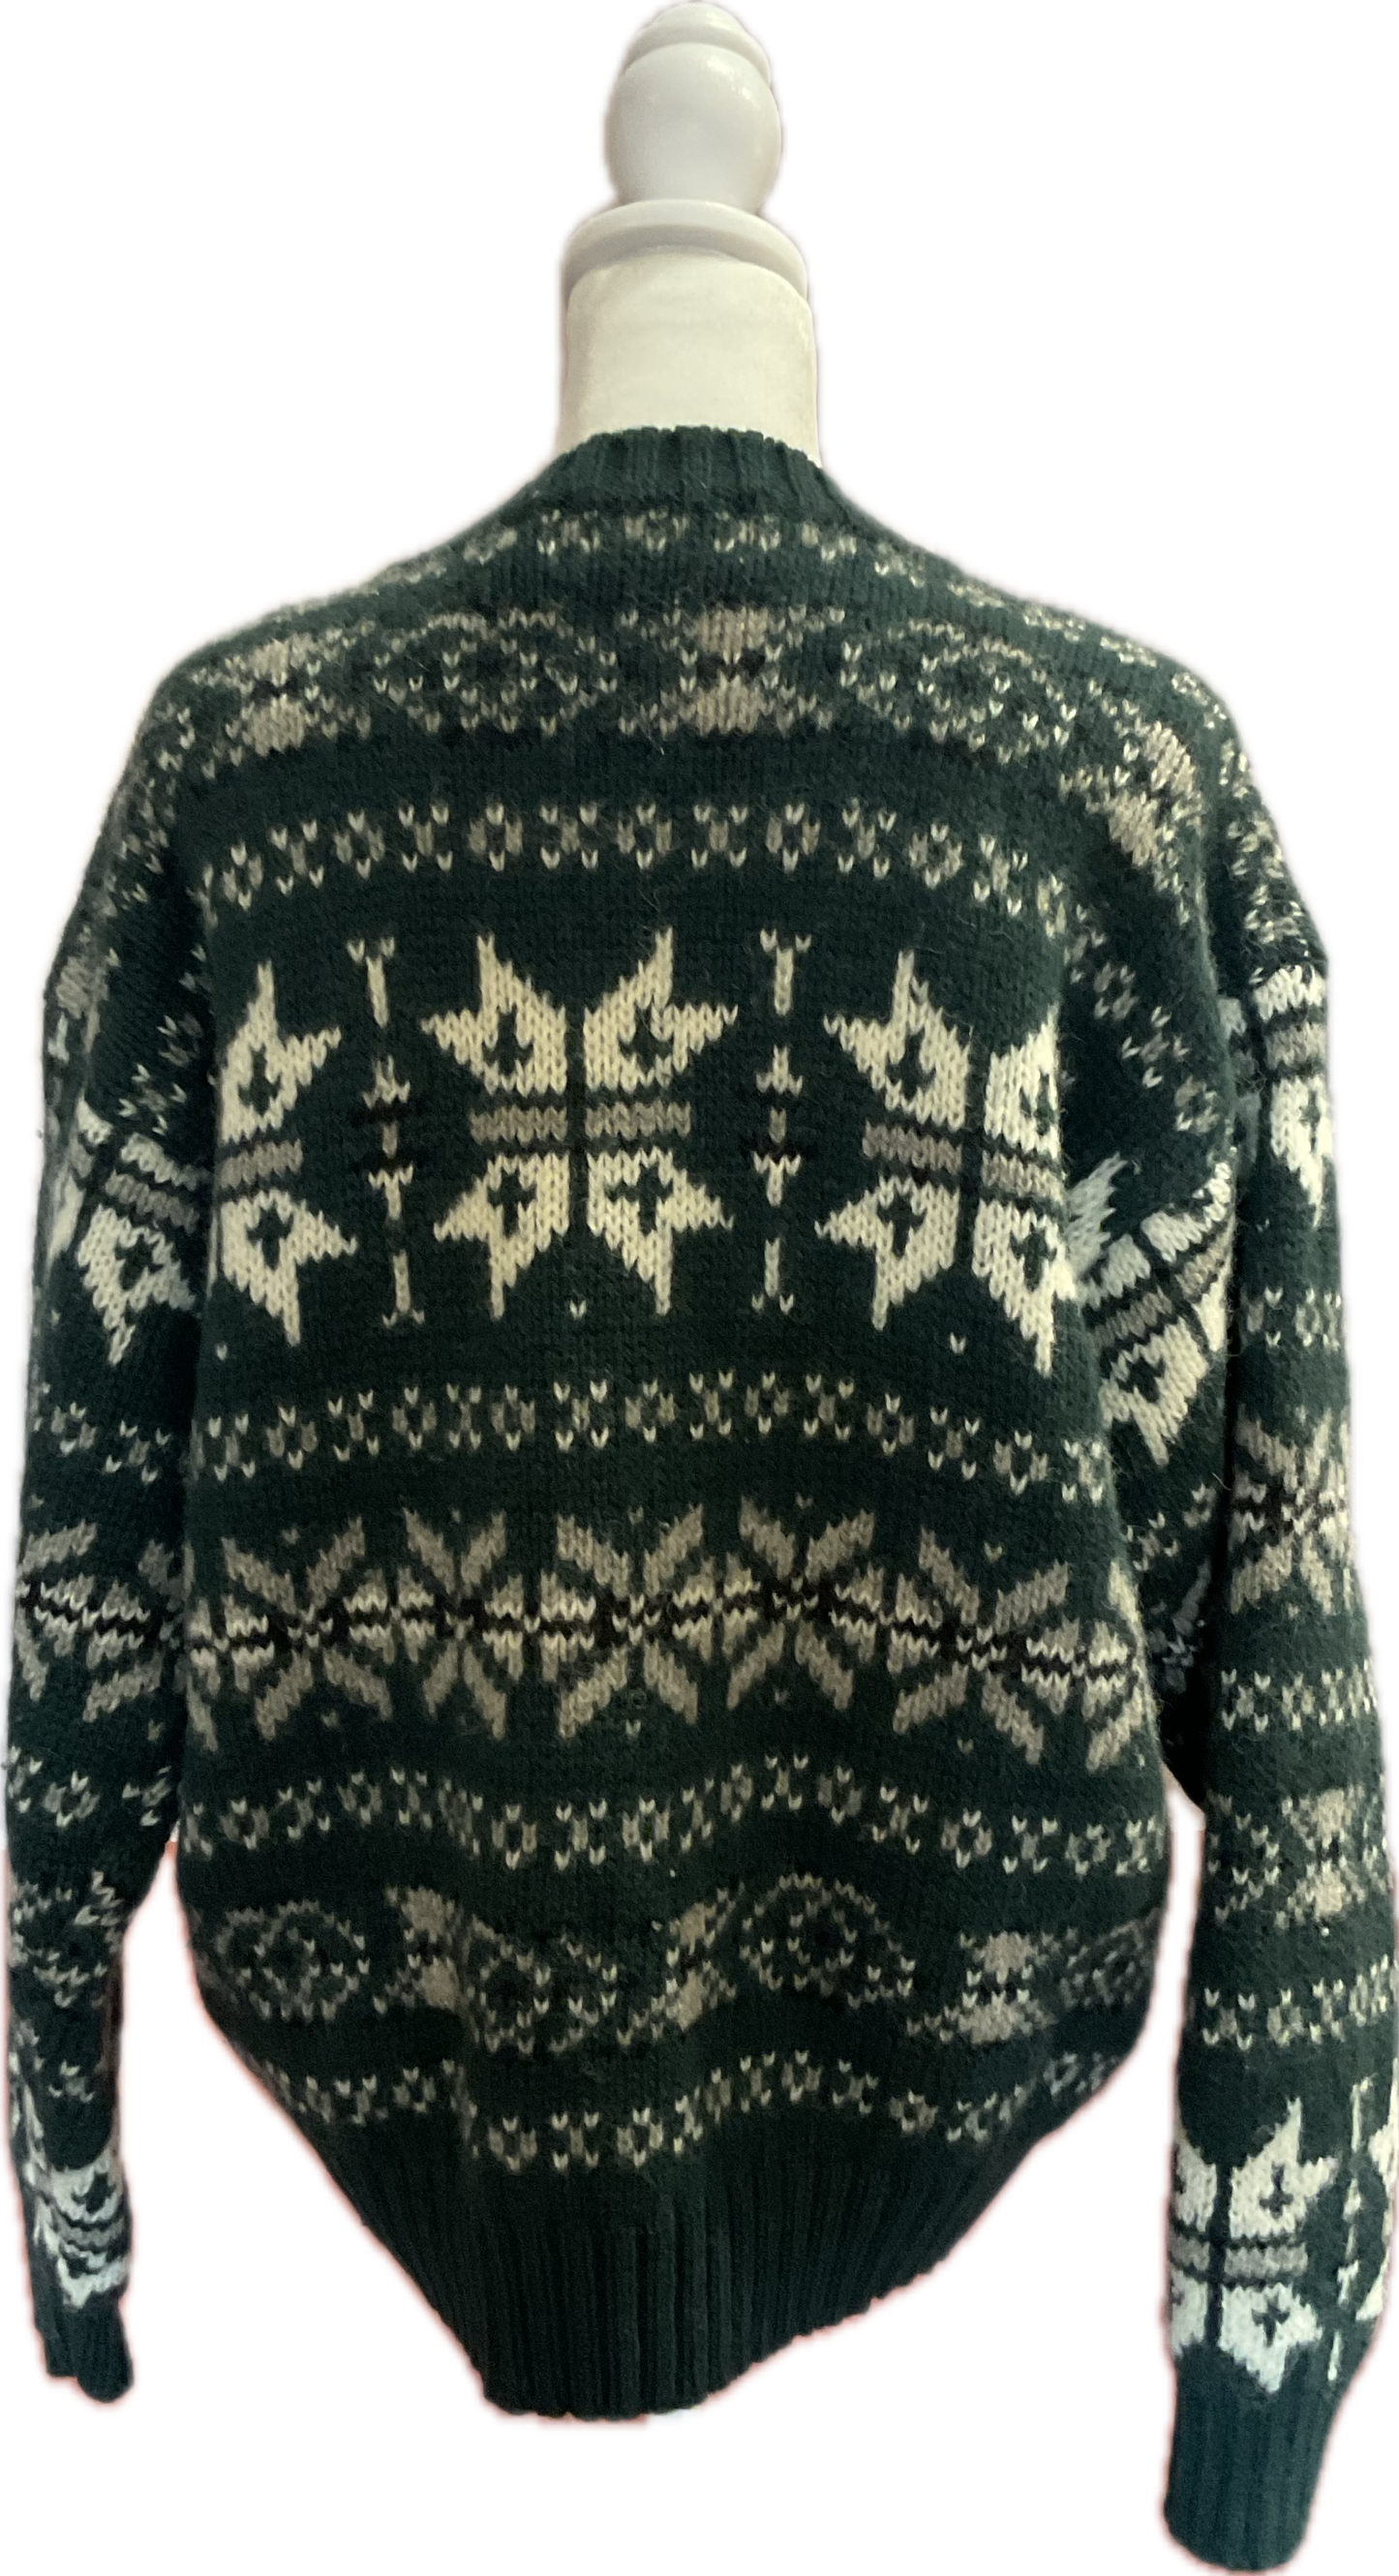 Vintage American Eagle Outfitters Green, White & Grey Wool Knit Snowflake Crewnek Sweater (size large)